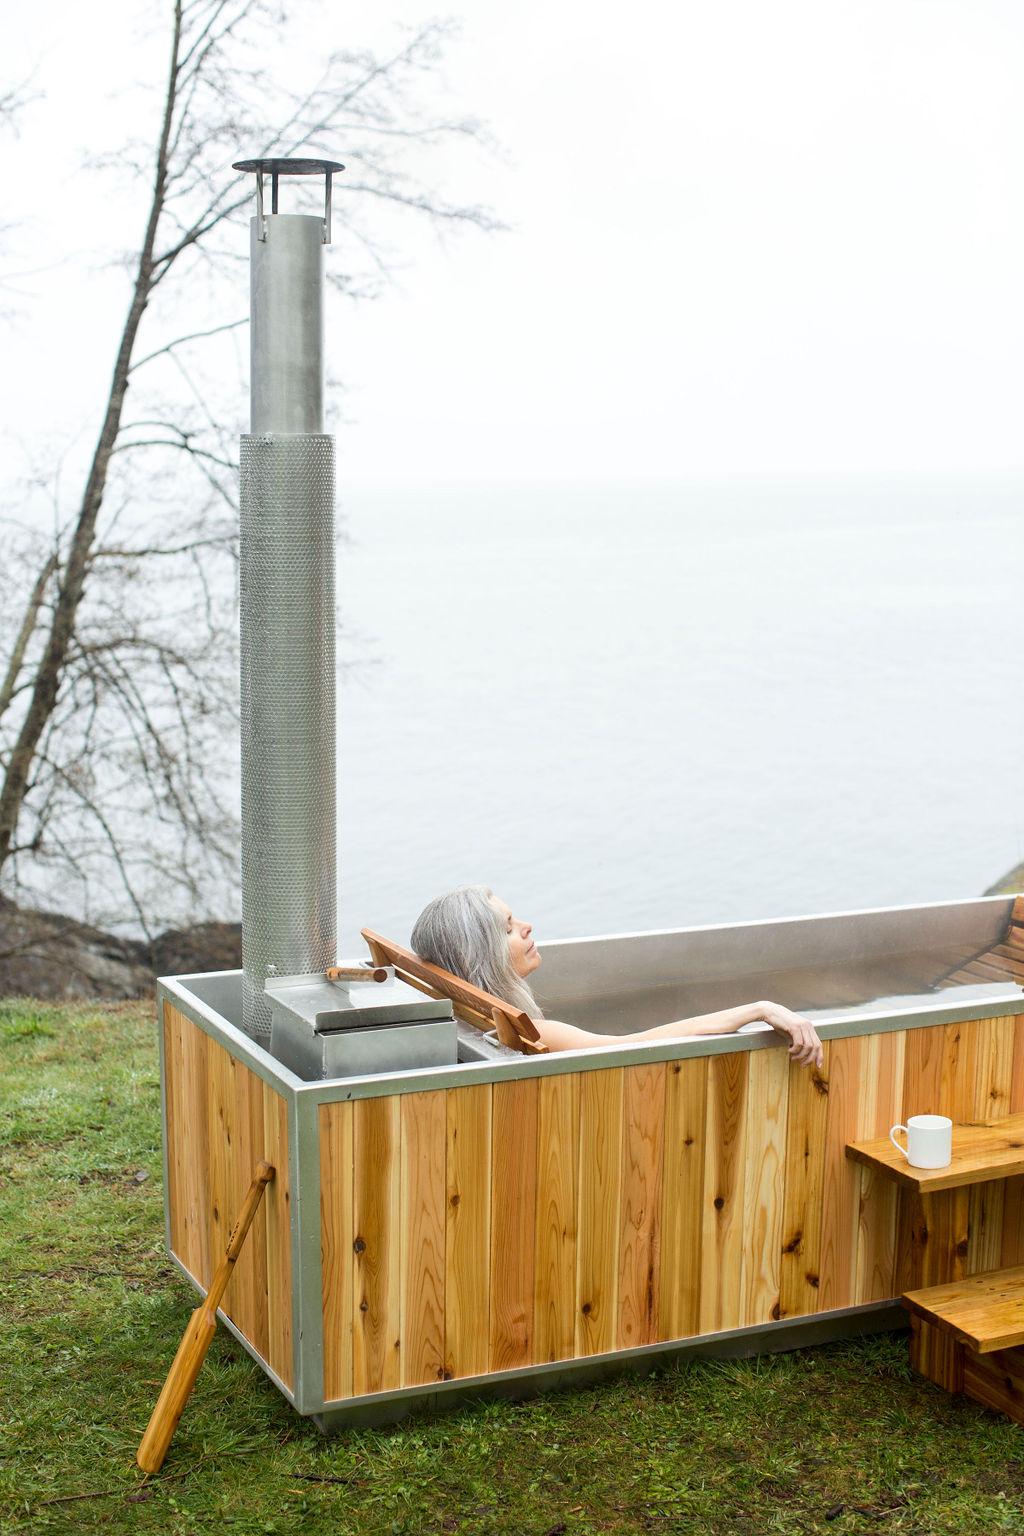 Canadian Goodland Wood Burning Hot Tub '2-3 Person' For Sale